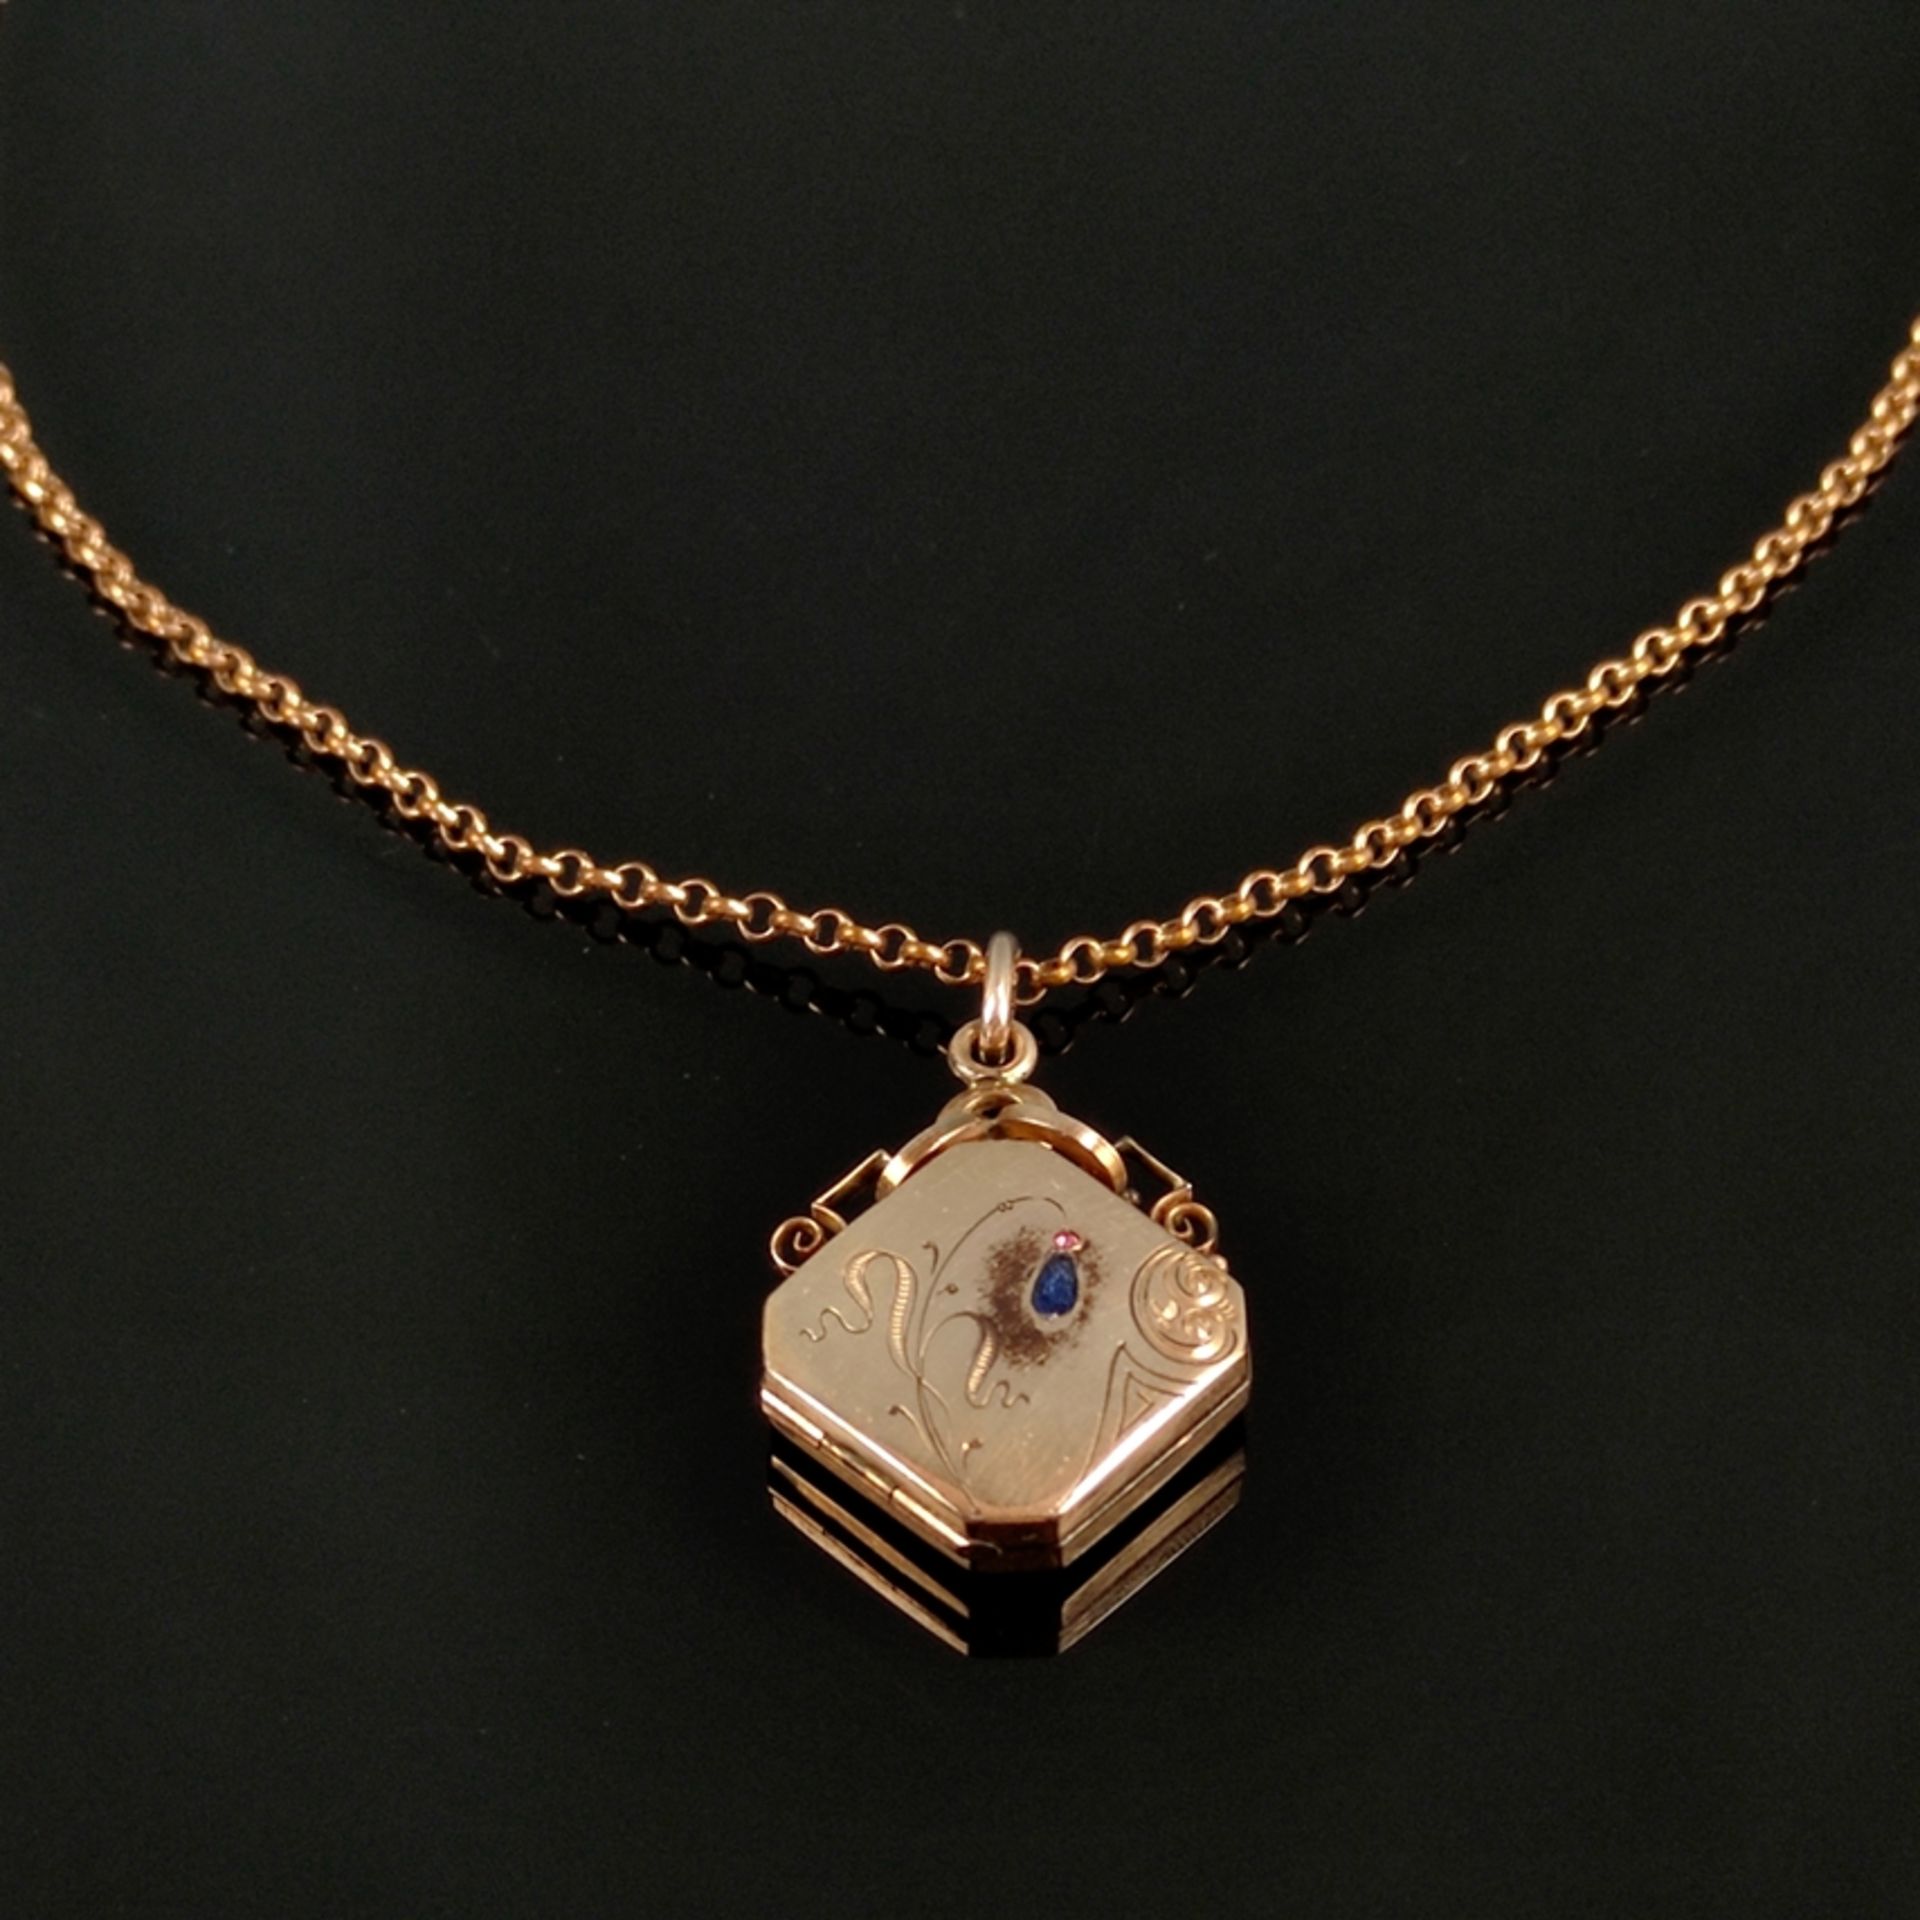 Art Nouveau medallion pendant with chain, foam gold, total weight 11,4g, octagonal hinged pendant o